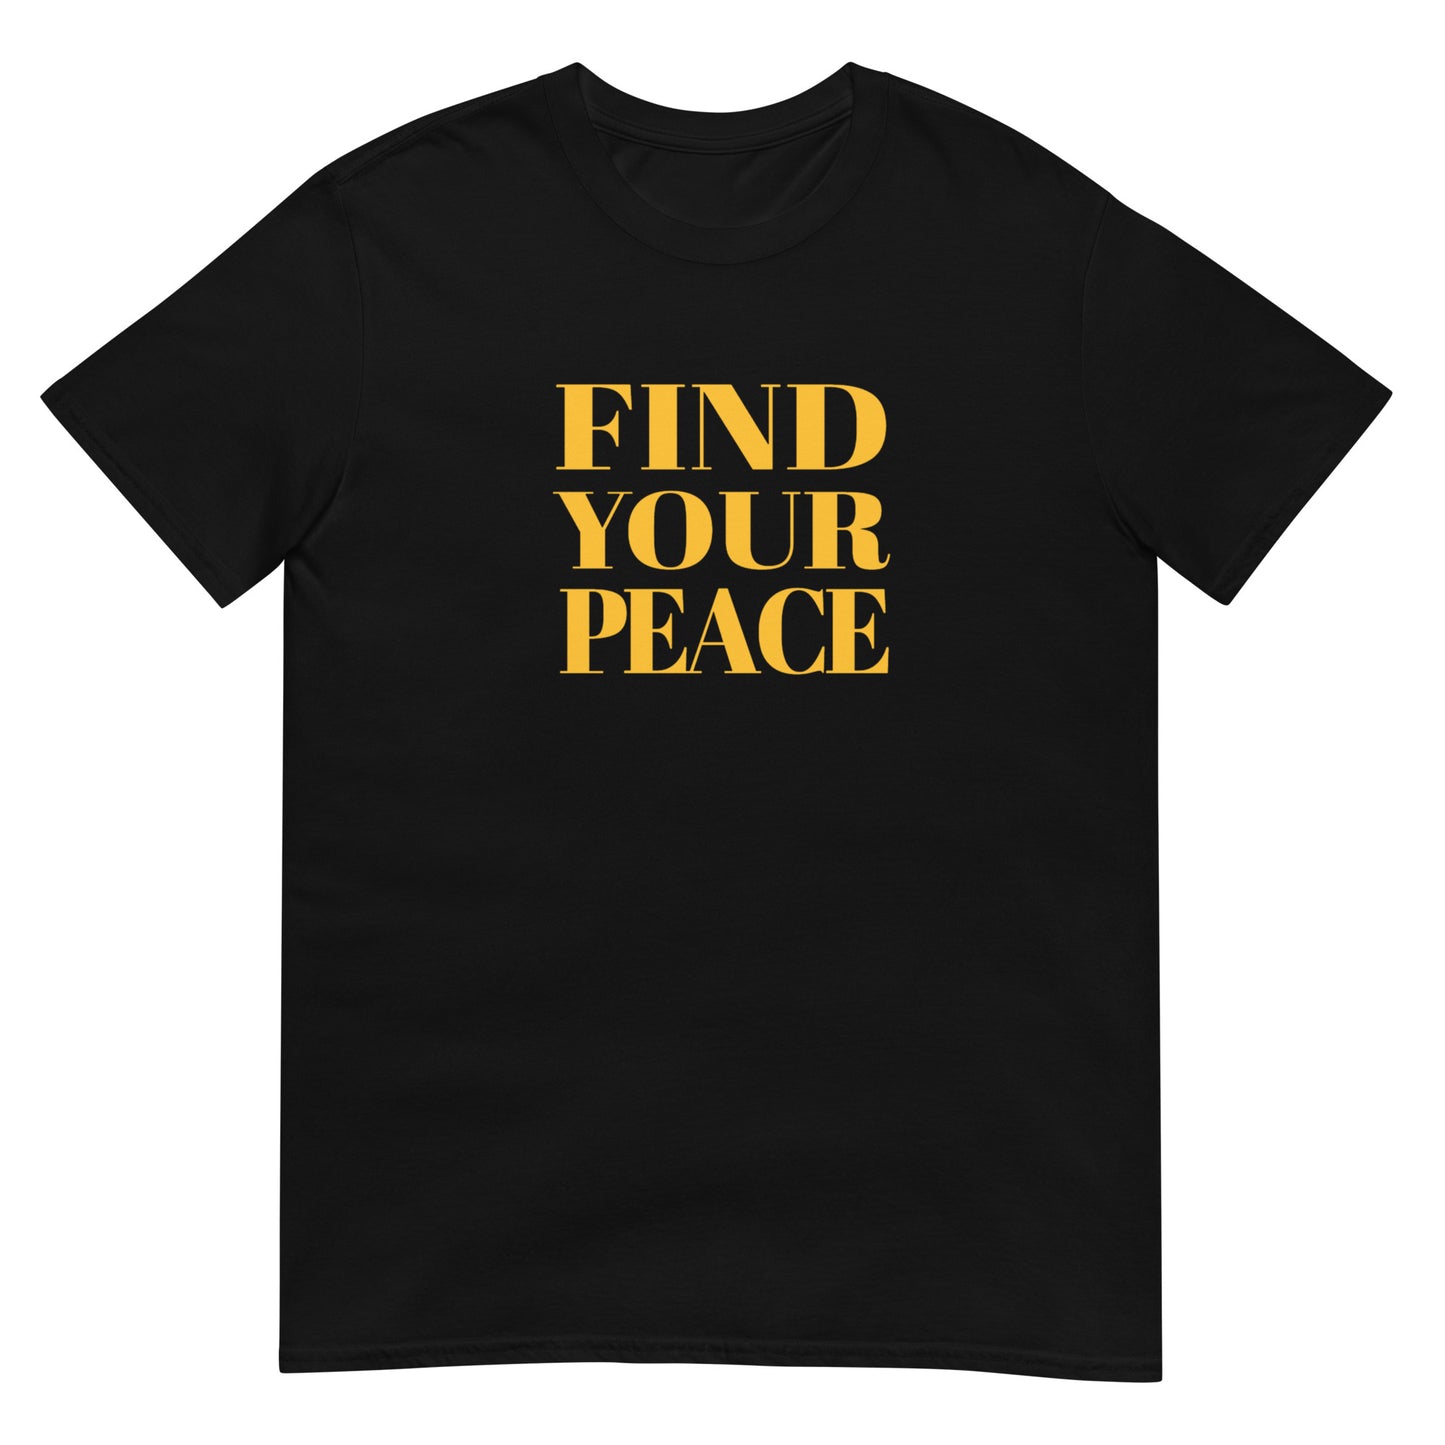 Find Your Peace Short-Sleeve Unisex T-Shirt